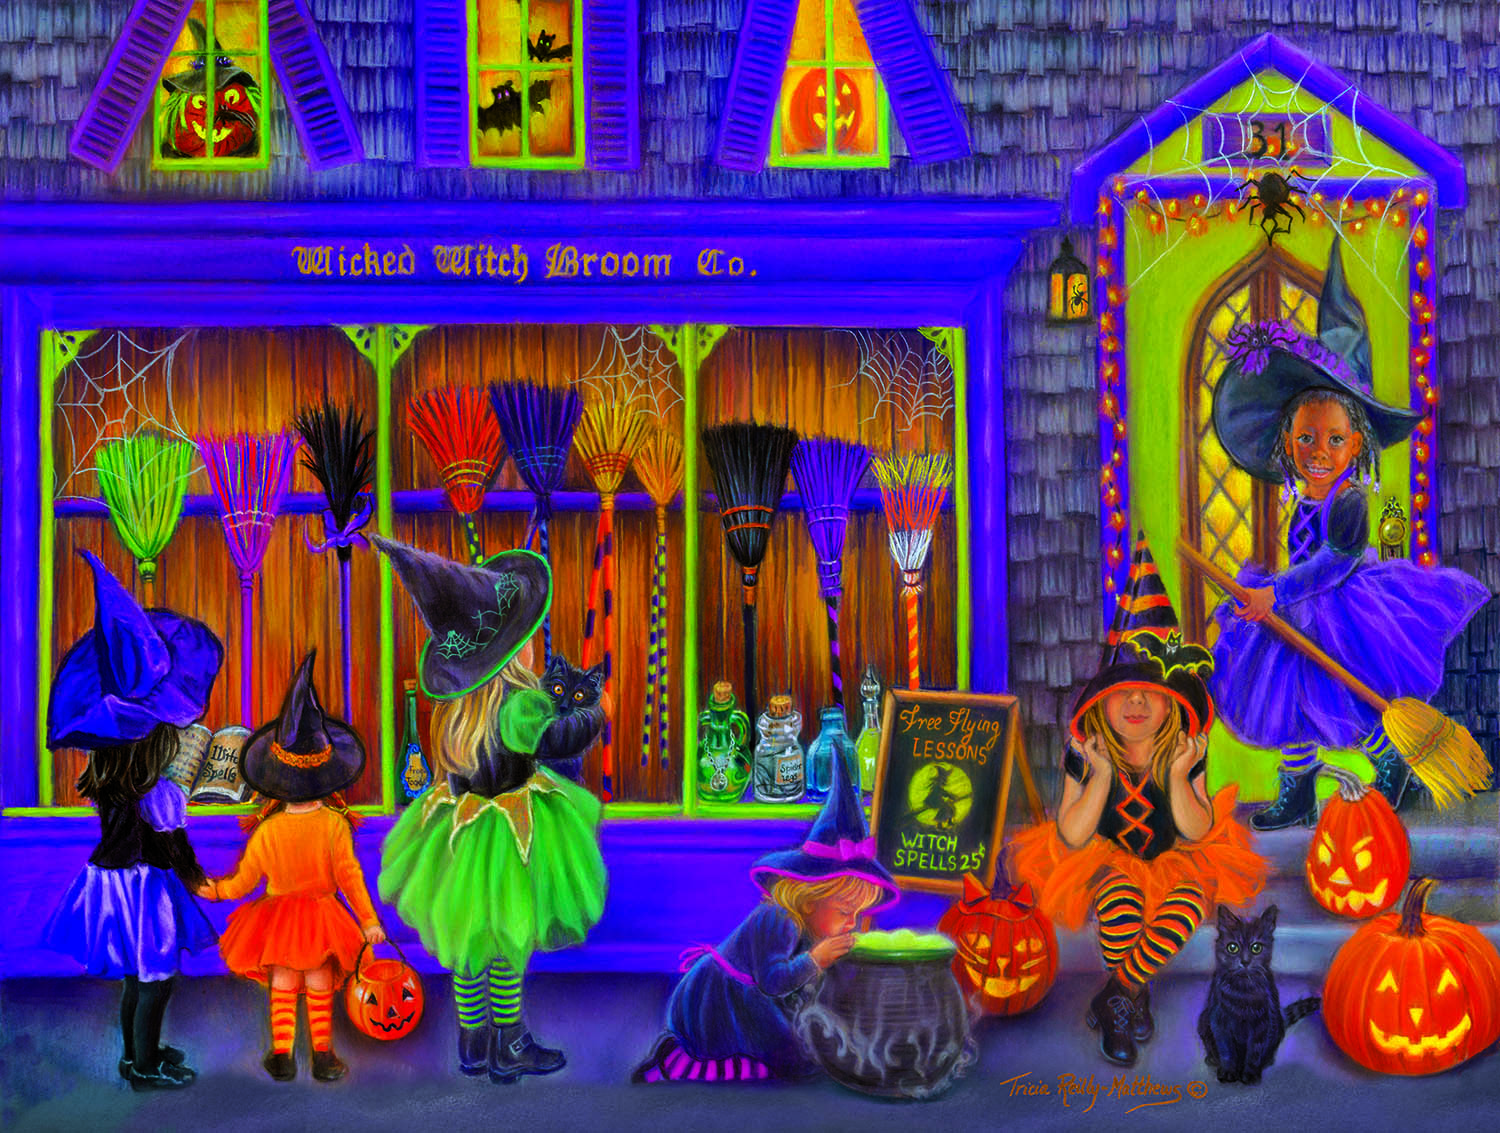 SO-35970 - Witch Broom Shop